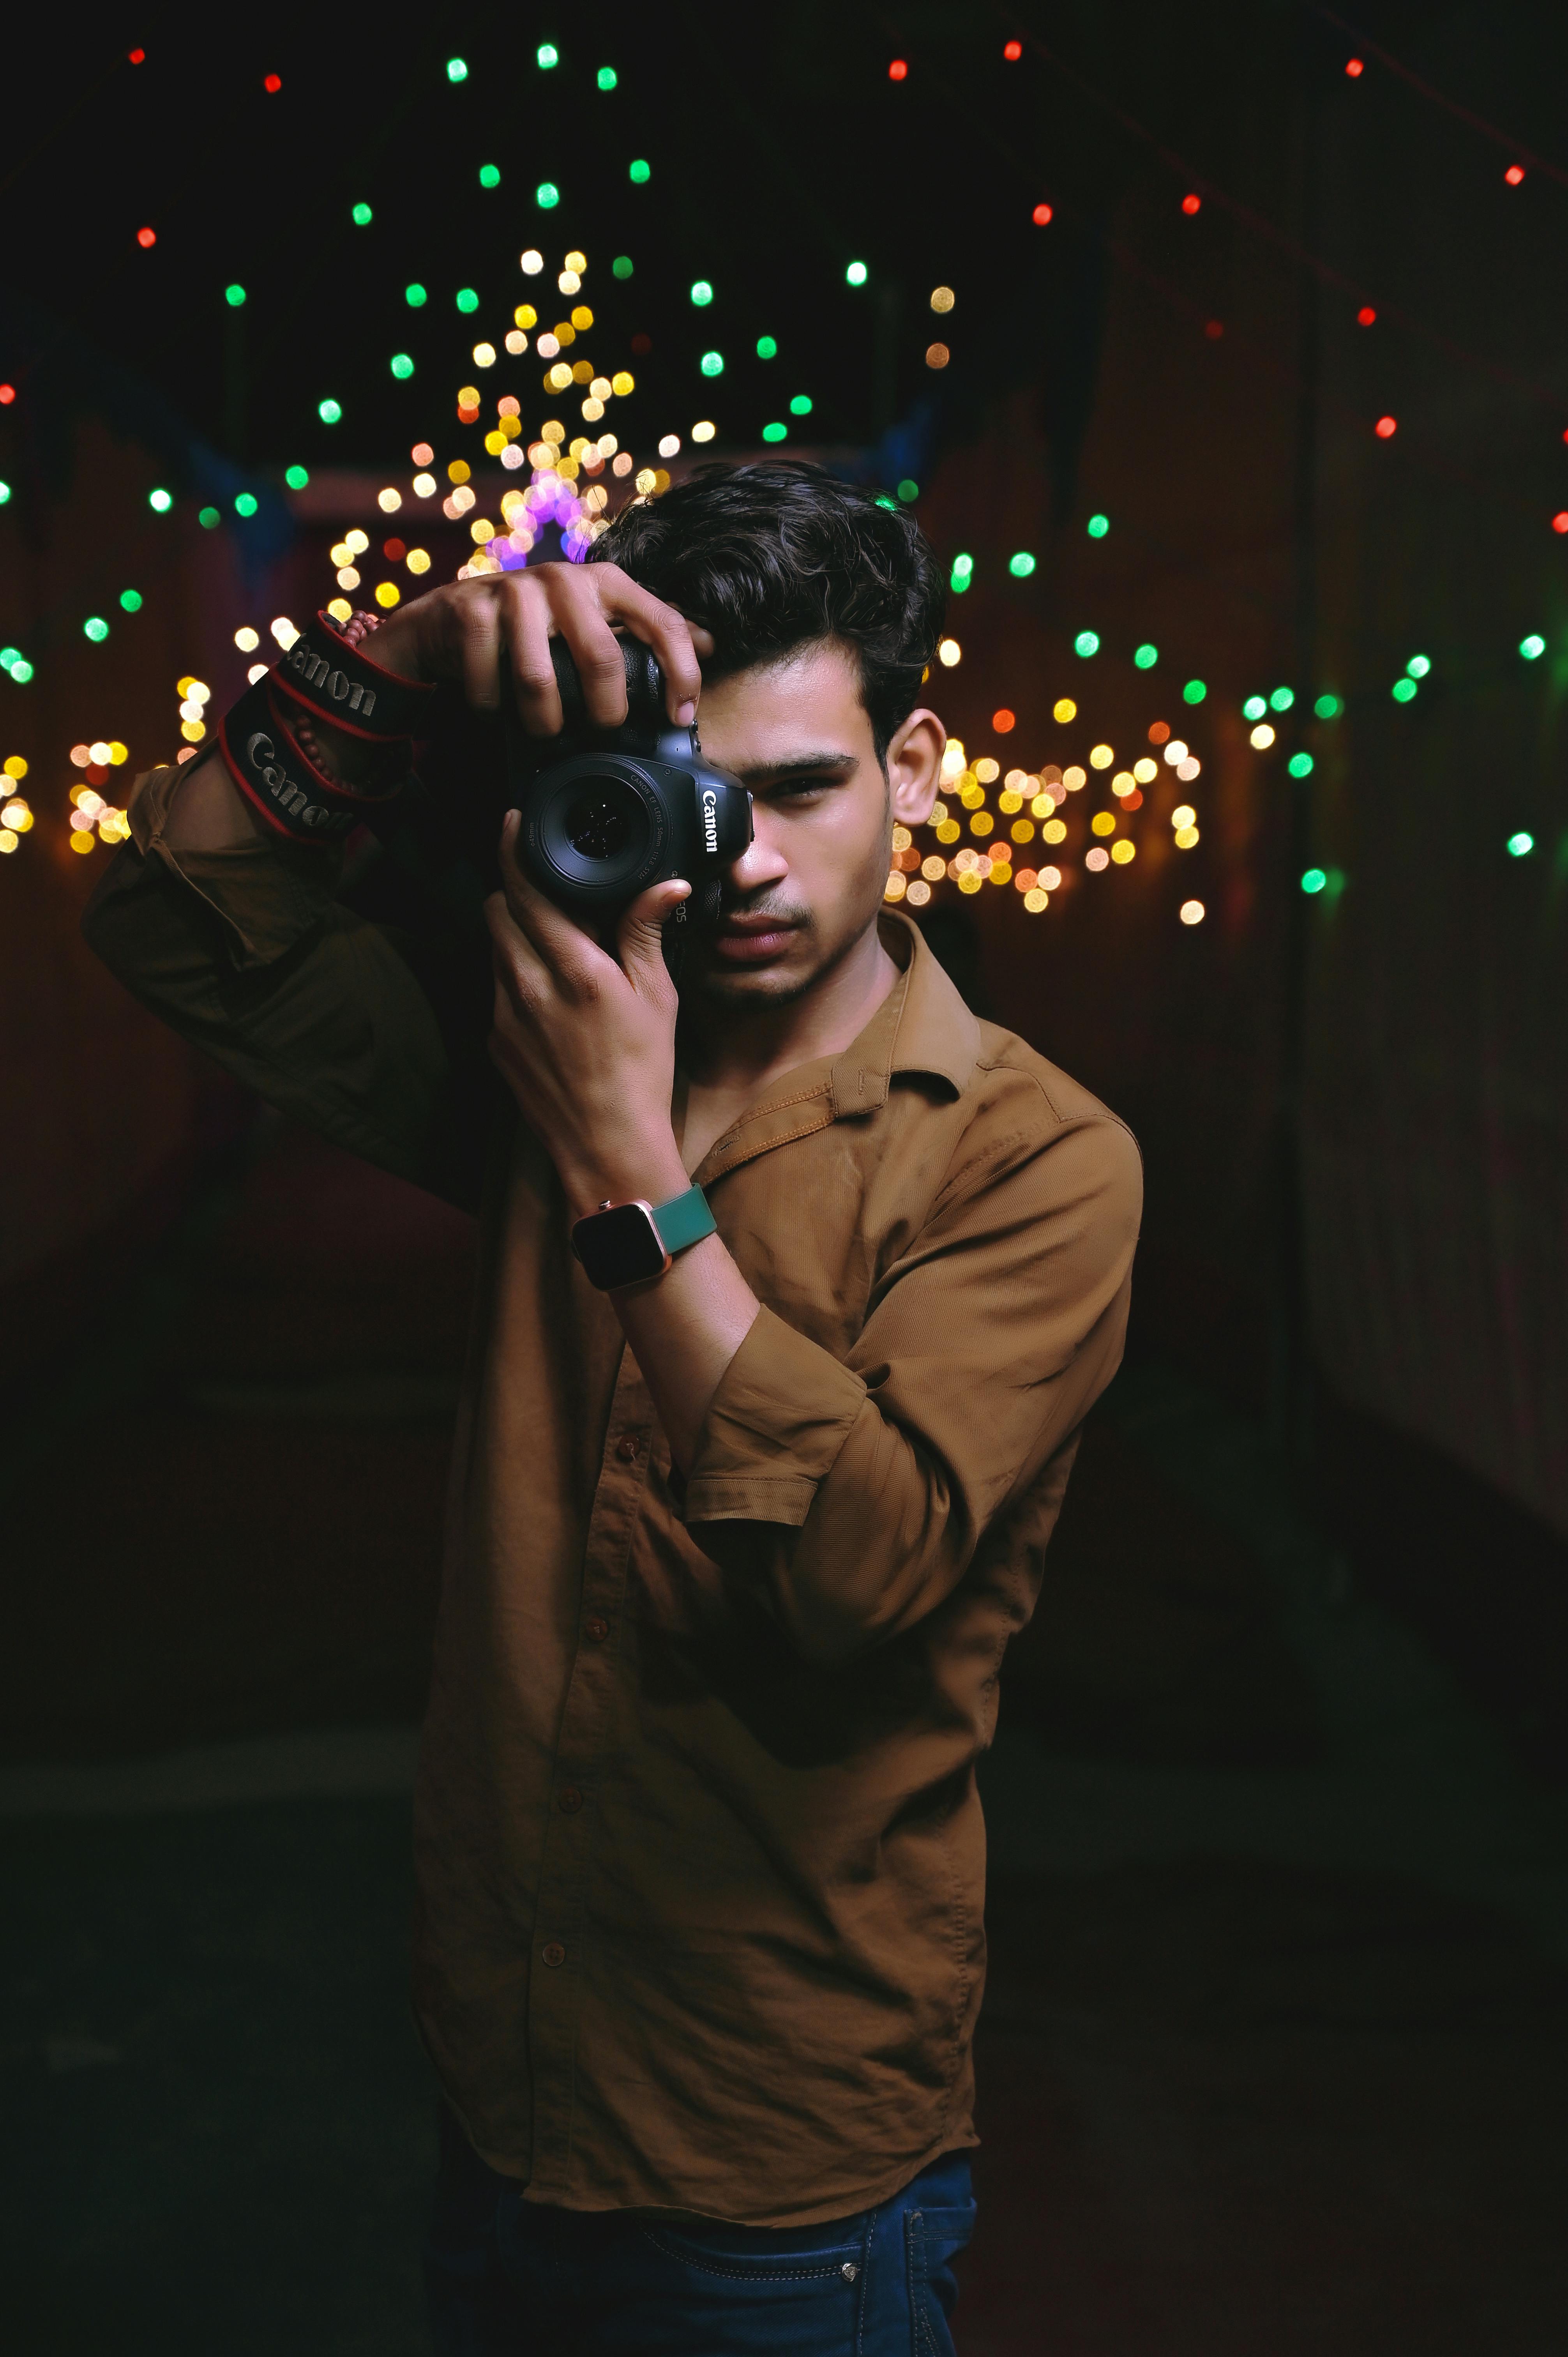 A Fashionable Young Cameraman Background, Cameramen, Photography, Cameraman  Background Image And Wallpaper for Free Download